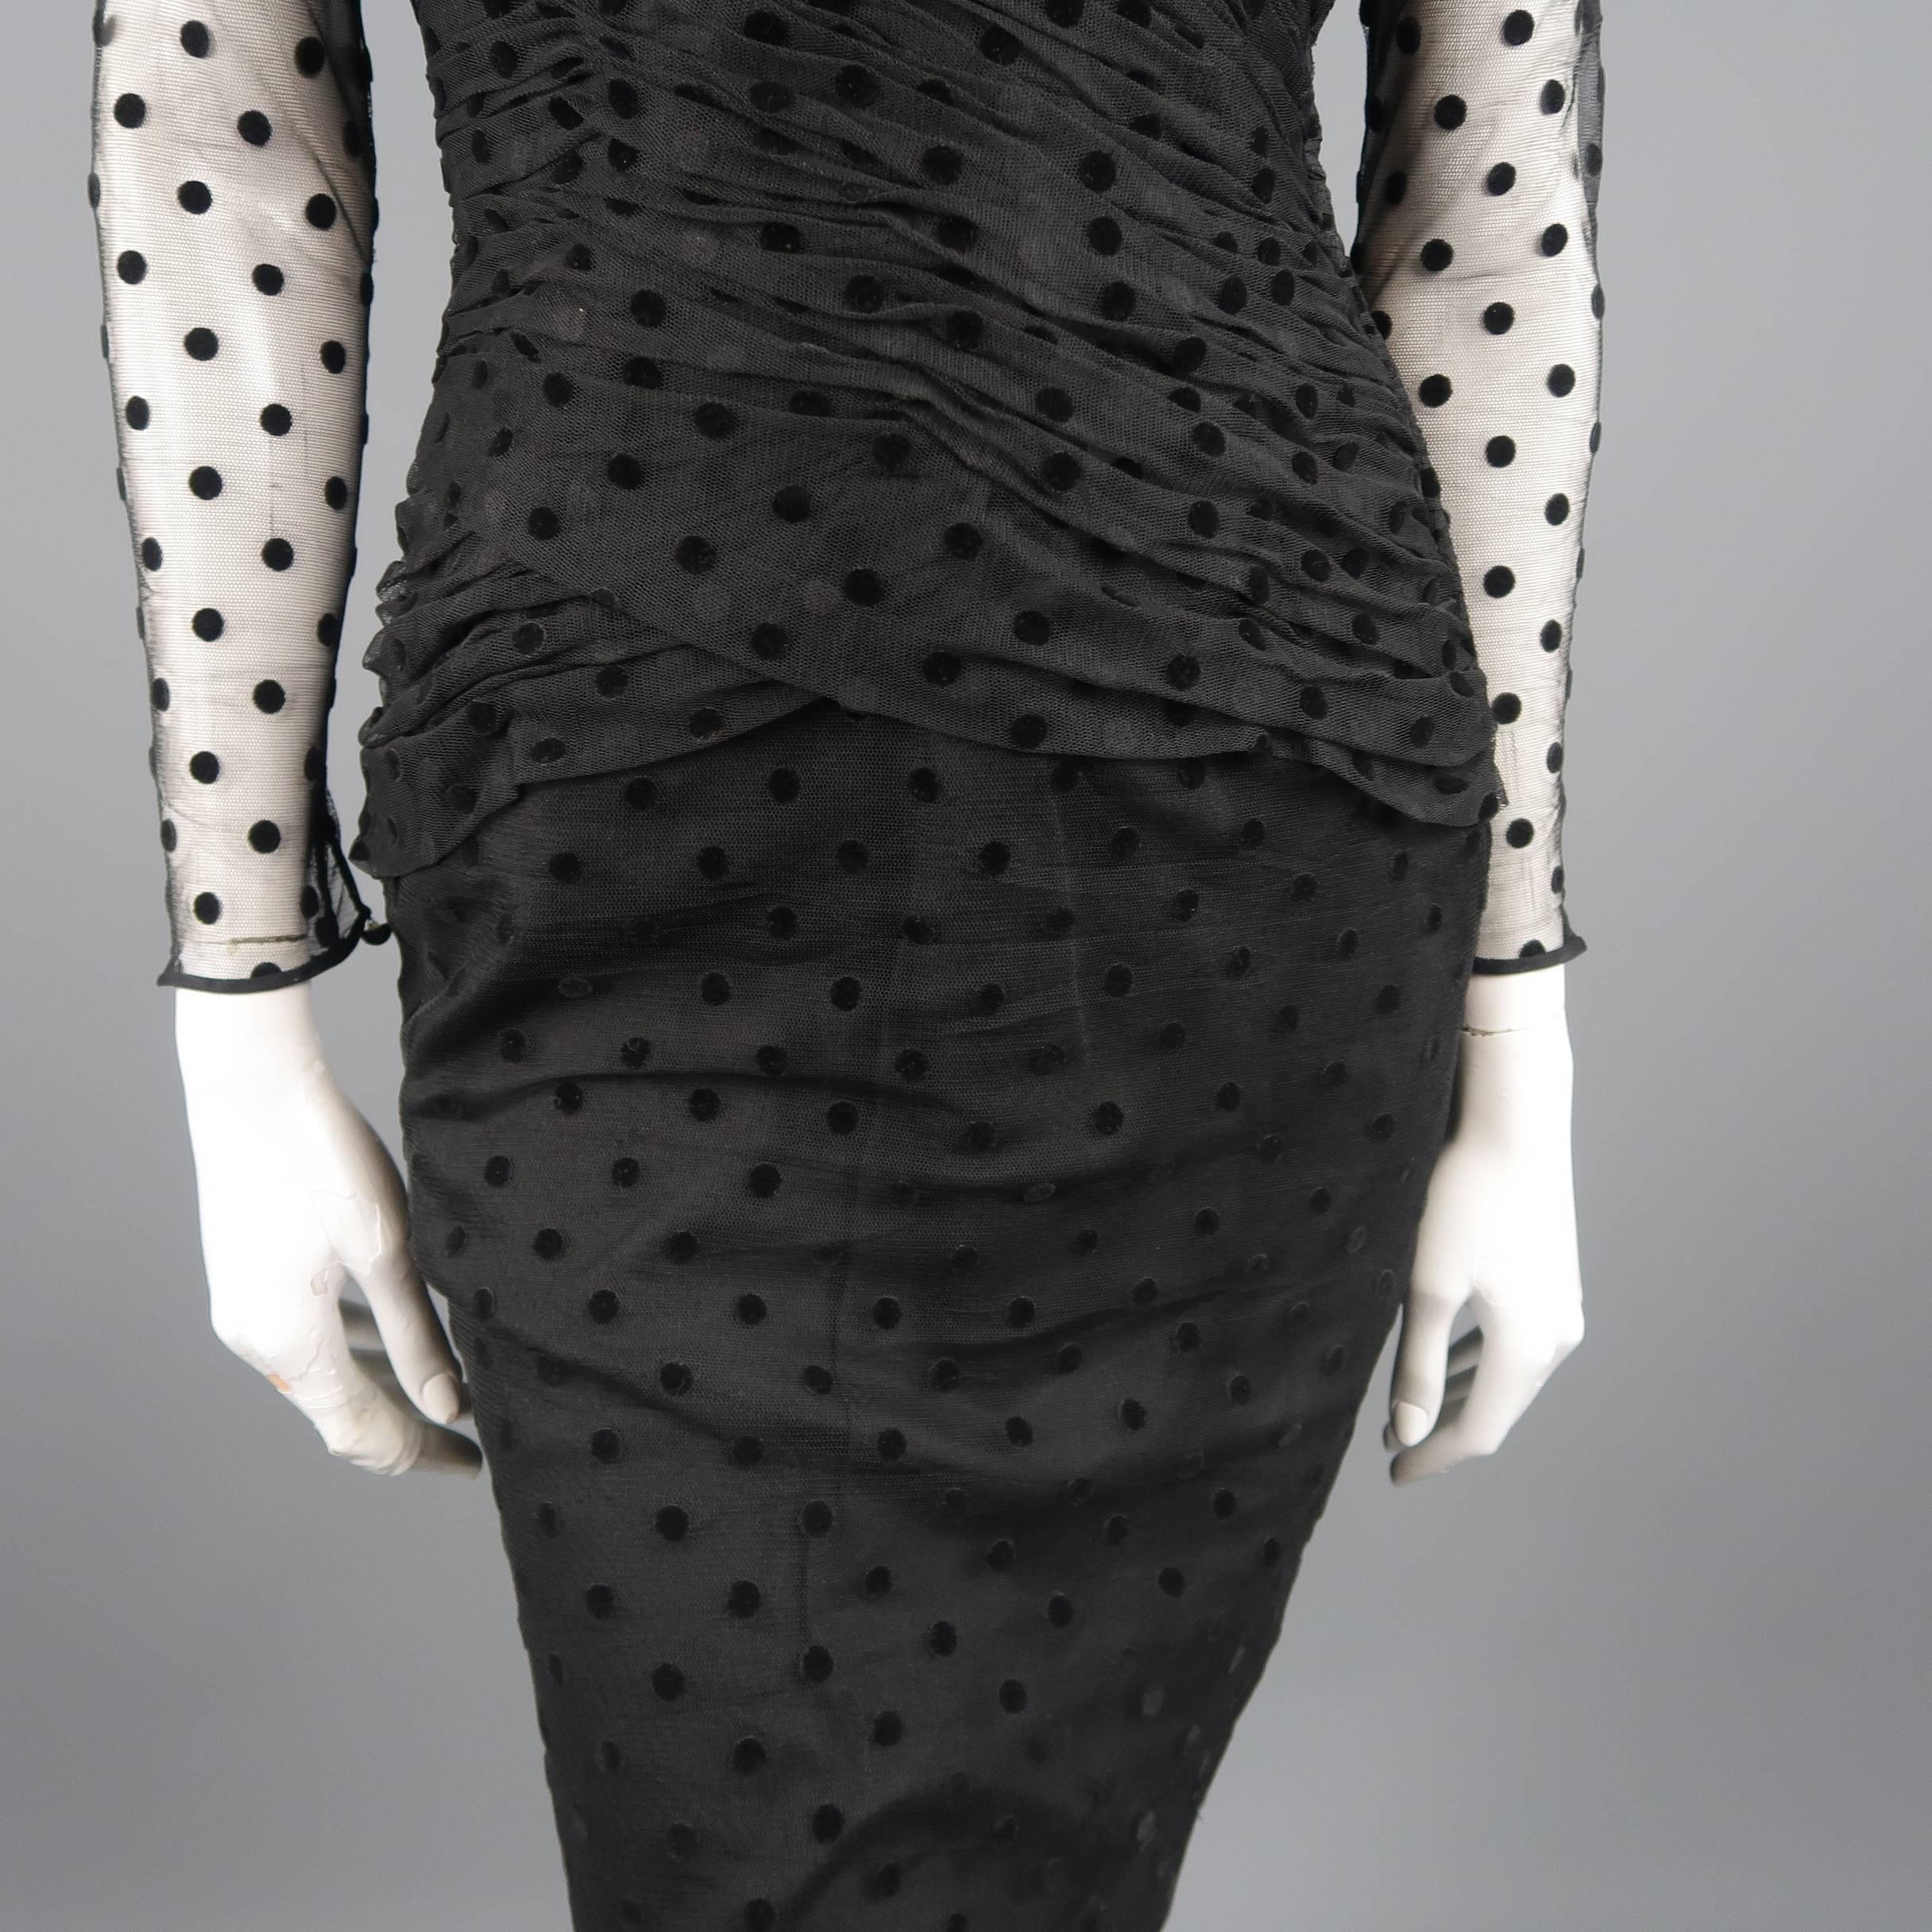 Vintage 1980'S VICKY TIEL COUTURE cocktail dress comes in black silk tulle with velvet polka dots and features a sheer long sleeve top, pleated sweetheart bustier bodice, pencil skirt, open back, and layered bustle at back. Made in France.
 
Good